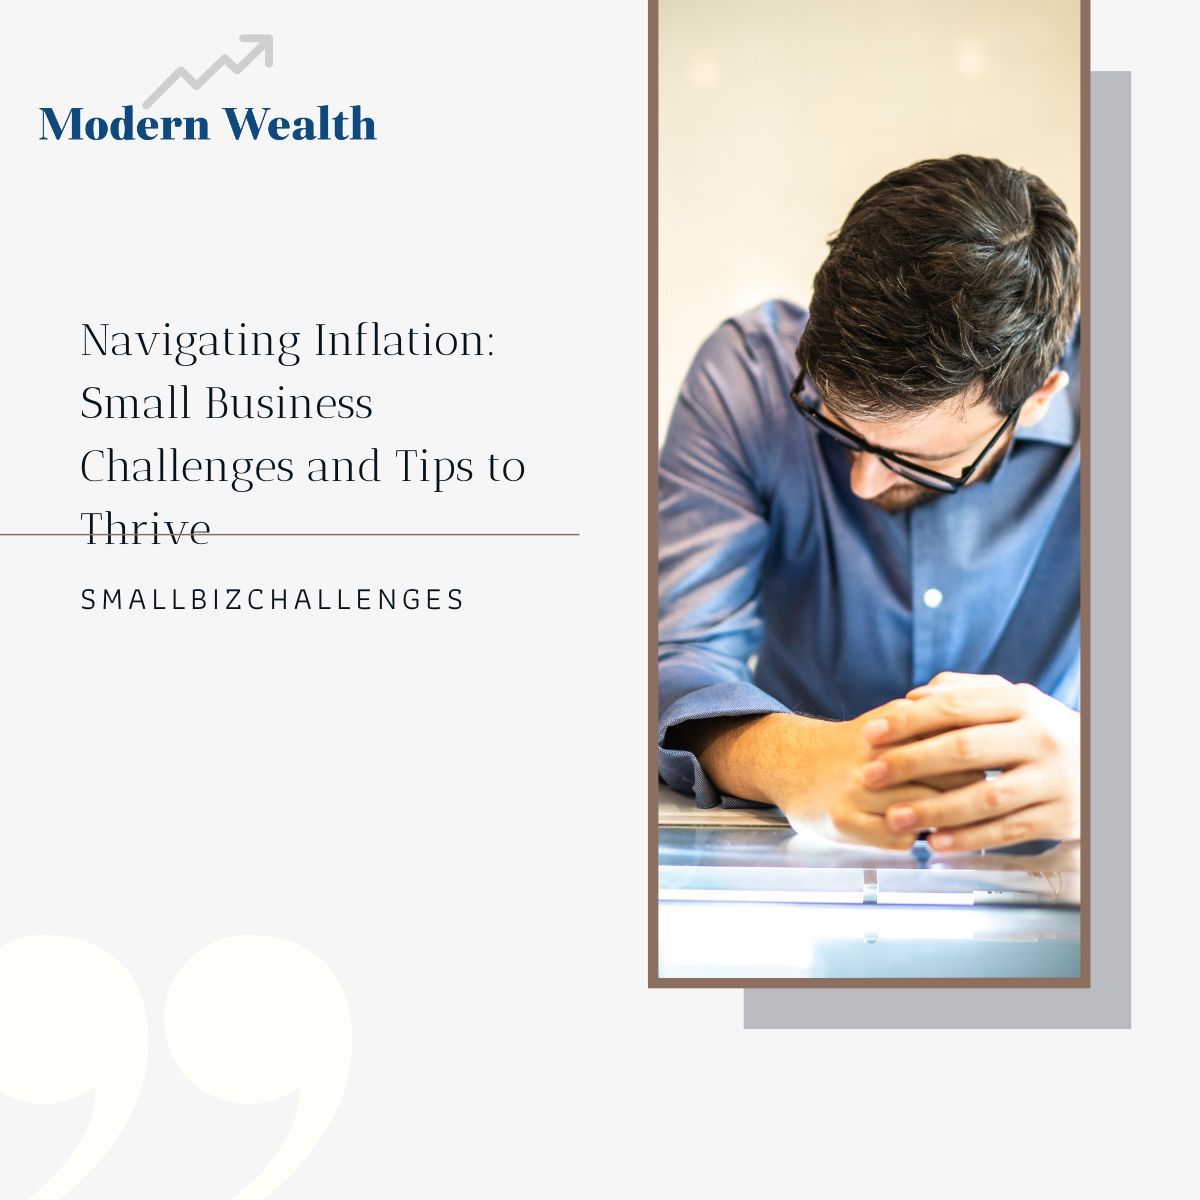 Small Business Challenges: 34% of small business owners cite inflation as their biggest worry, outstripping labor and tax concerns. Learn how to navigate these inflationary times. 

buff.ly/4a9CPdJ 

#SmallBiz #EconomicChallenges #ModernWealth